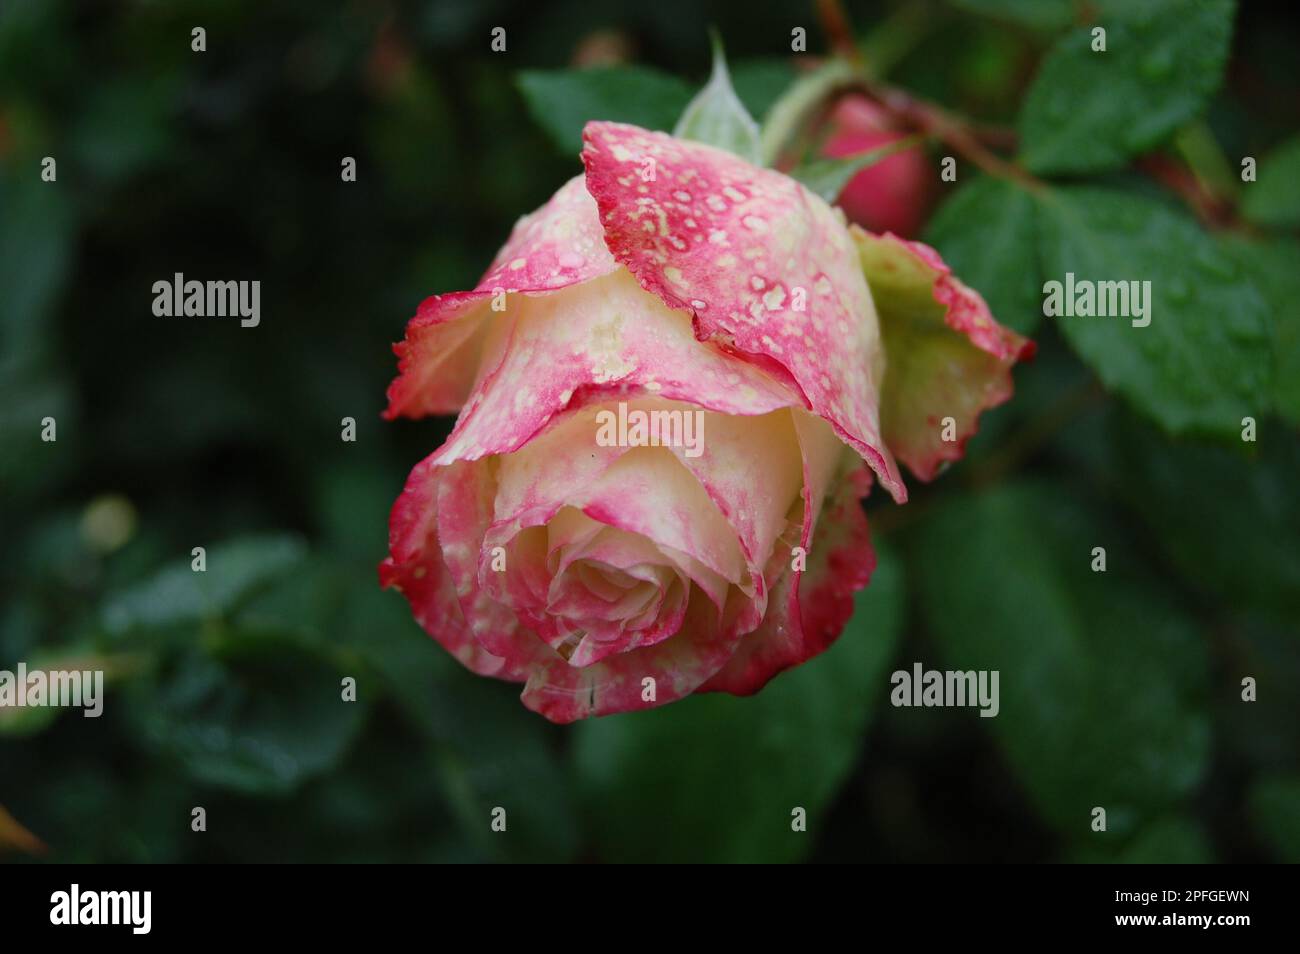 Close up of pink white color rose with spotted petals and rain drops on green leaves in background Stock Photo